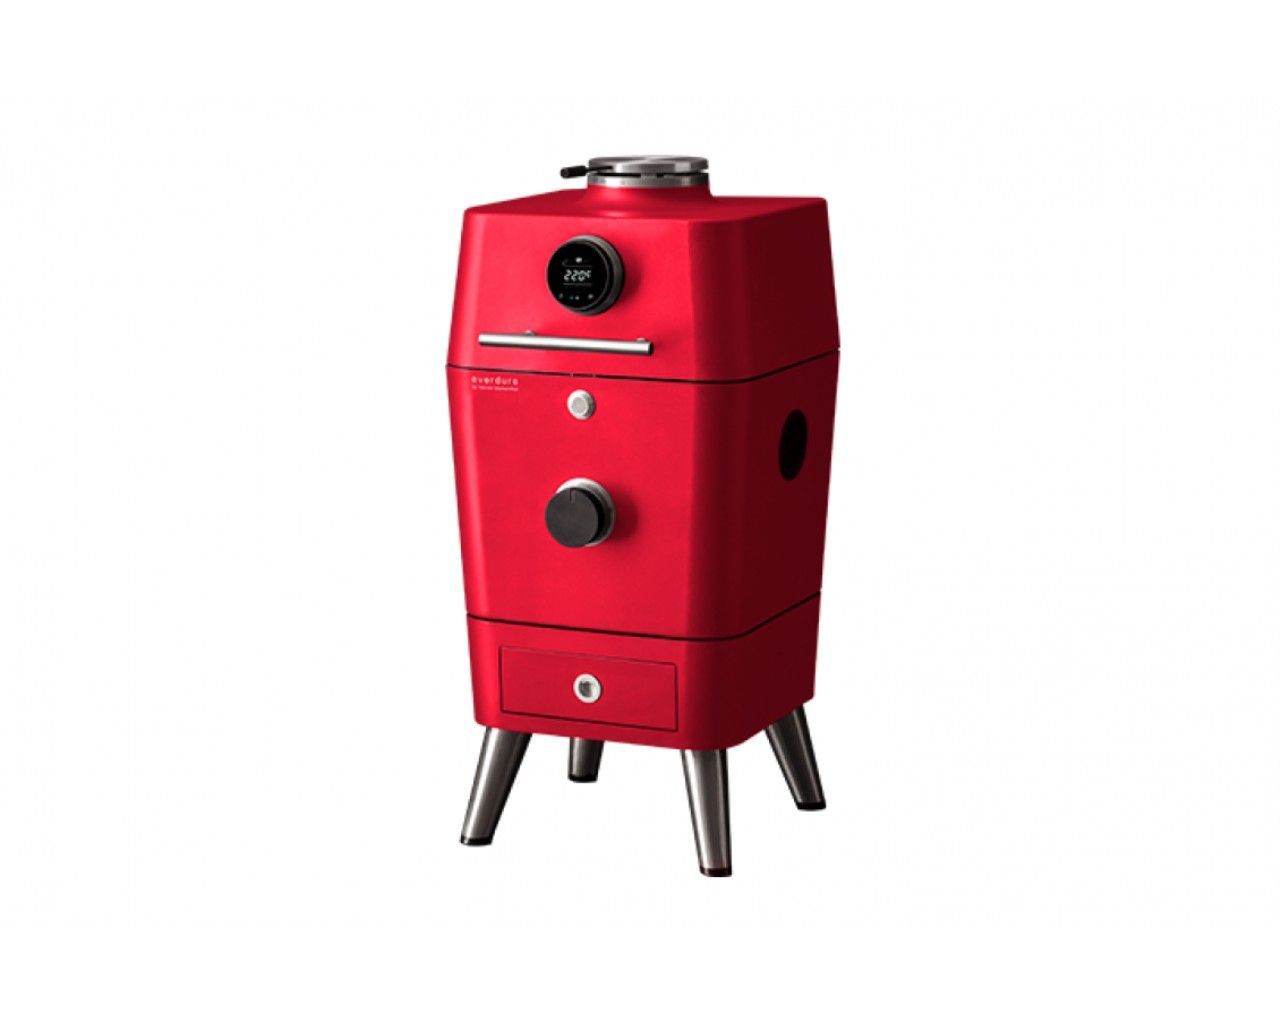 Everdure by Heston Blumenthal 4K Electric Ignition Charcoal Outdoor Oven, Red, small-swatch